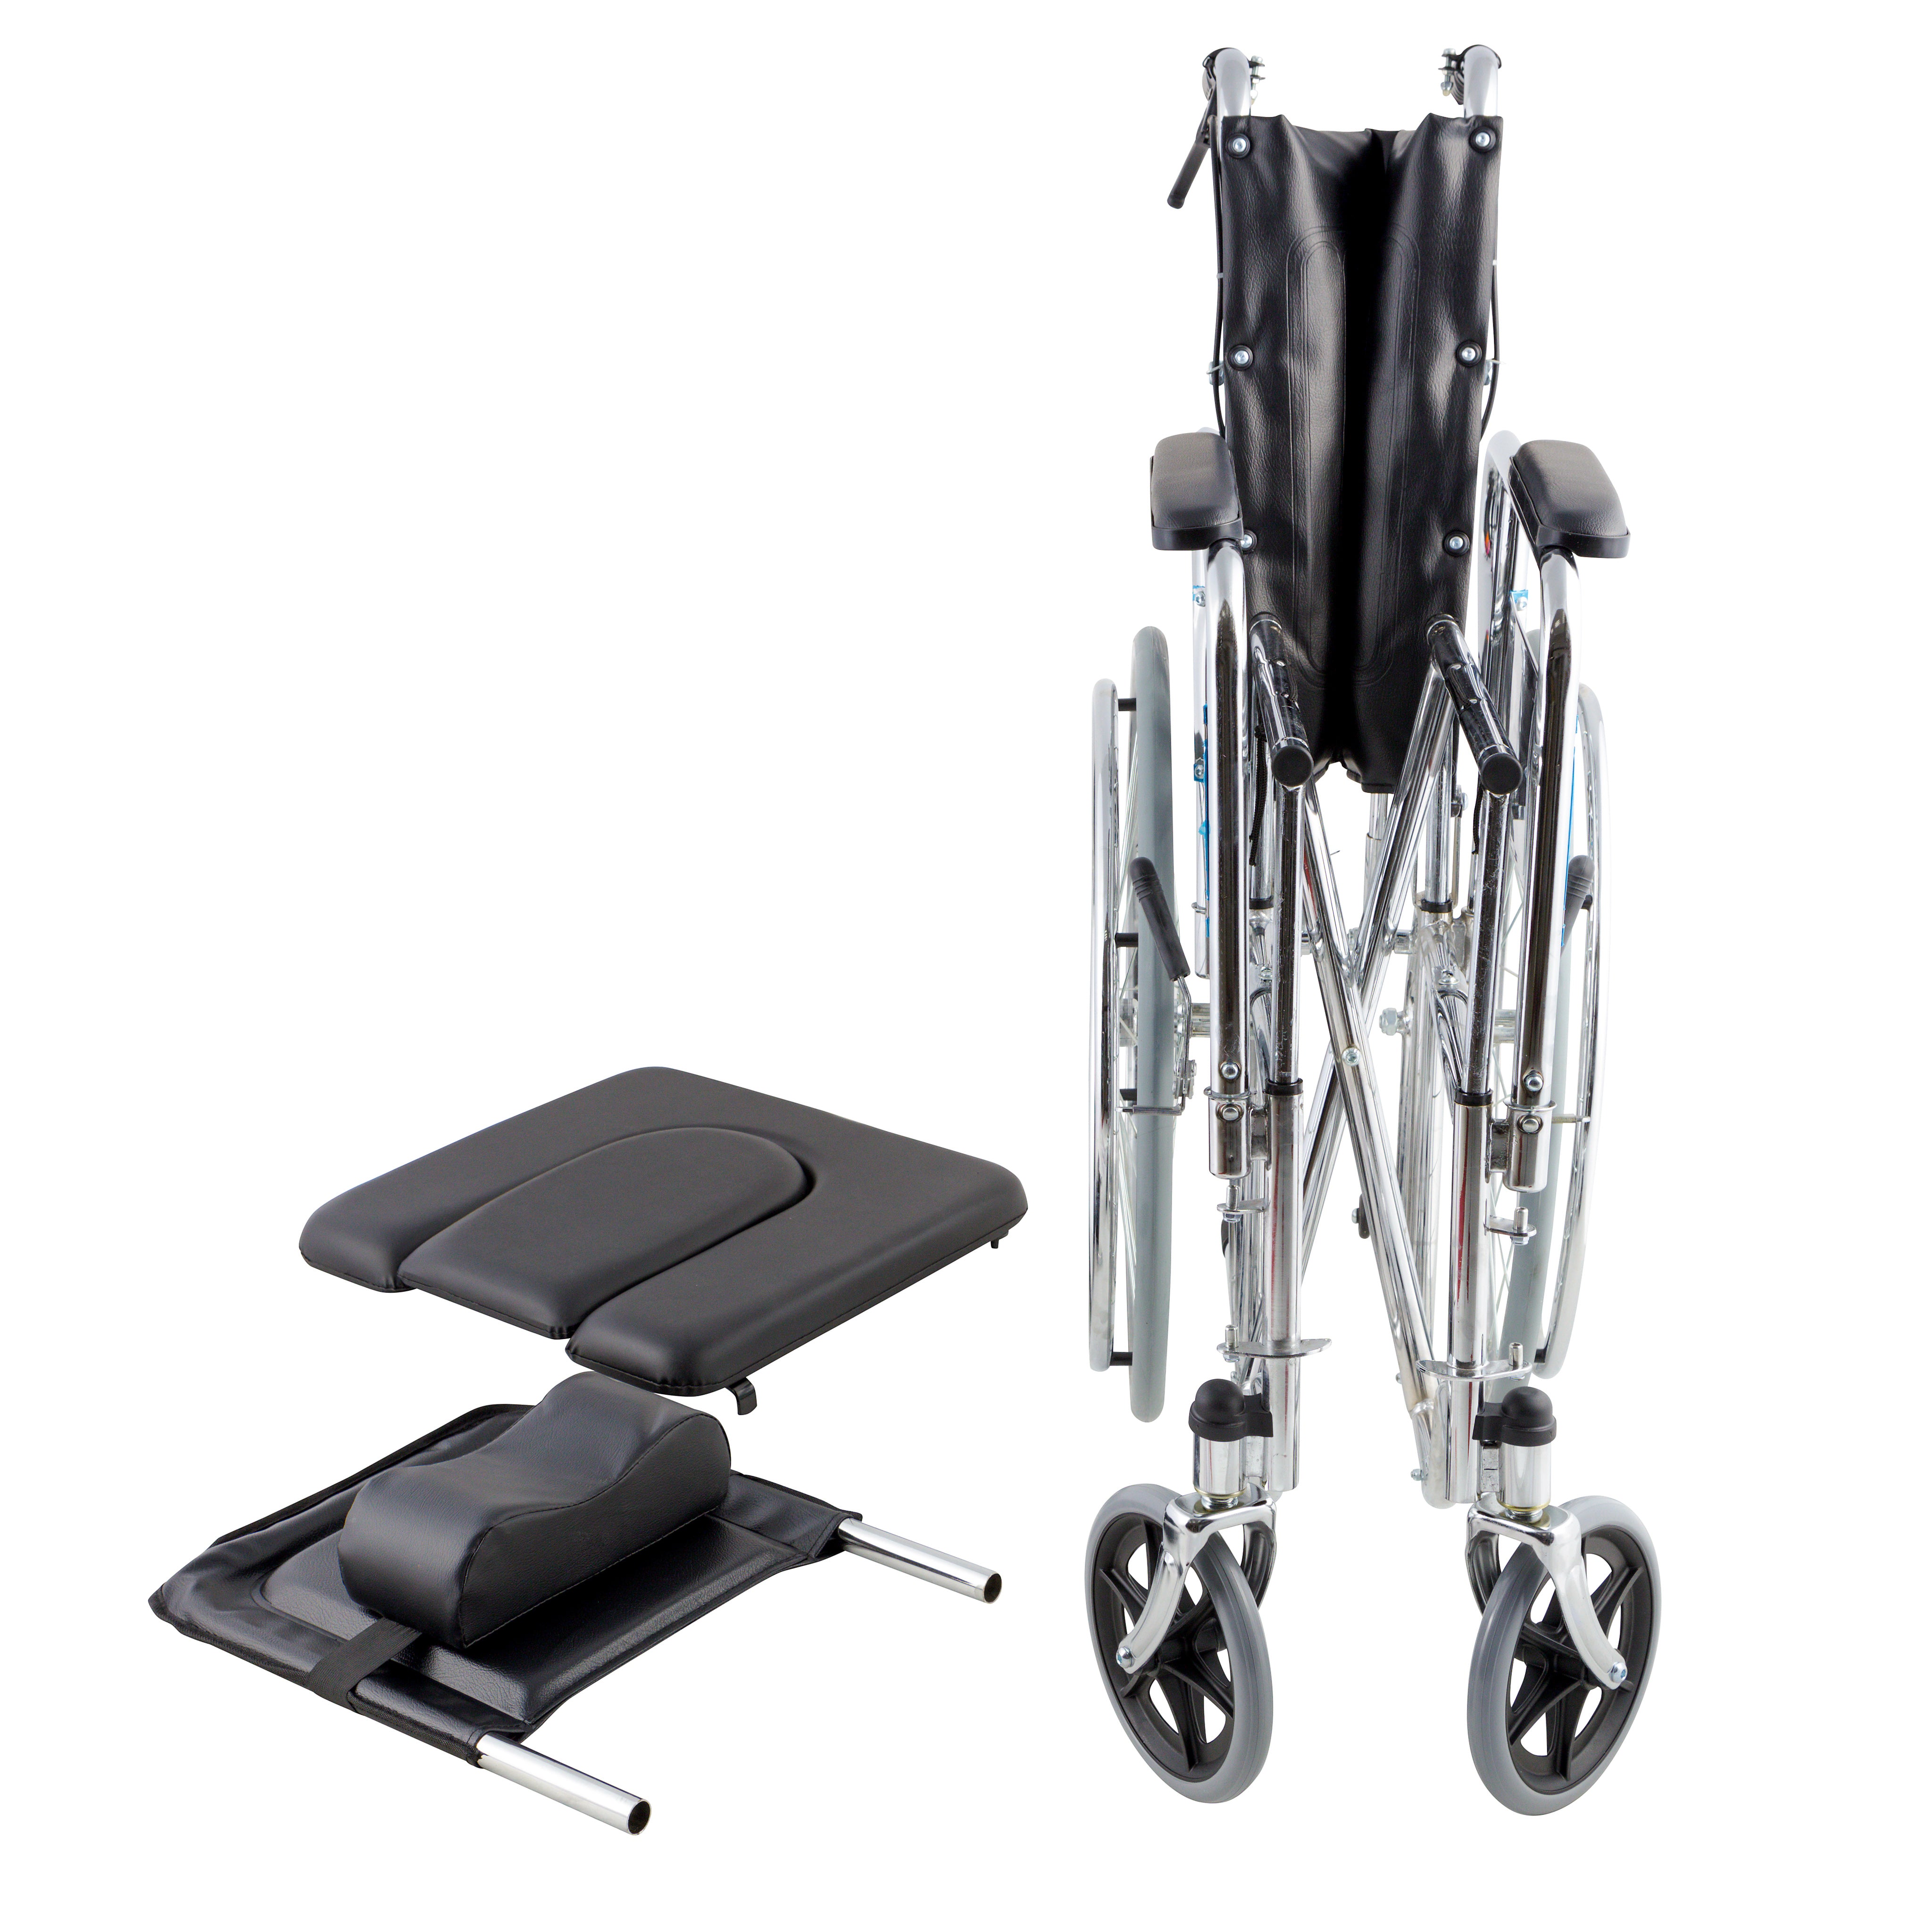 Multifunctional Reclining Commode Wheelchair With “U” Seat Panel, Detachable Armrests & Detachable Elevating Footrests